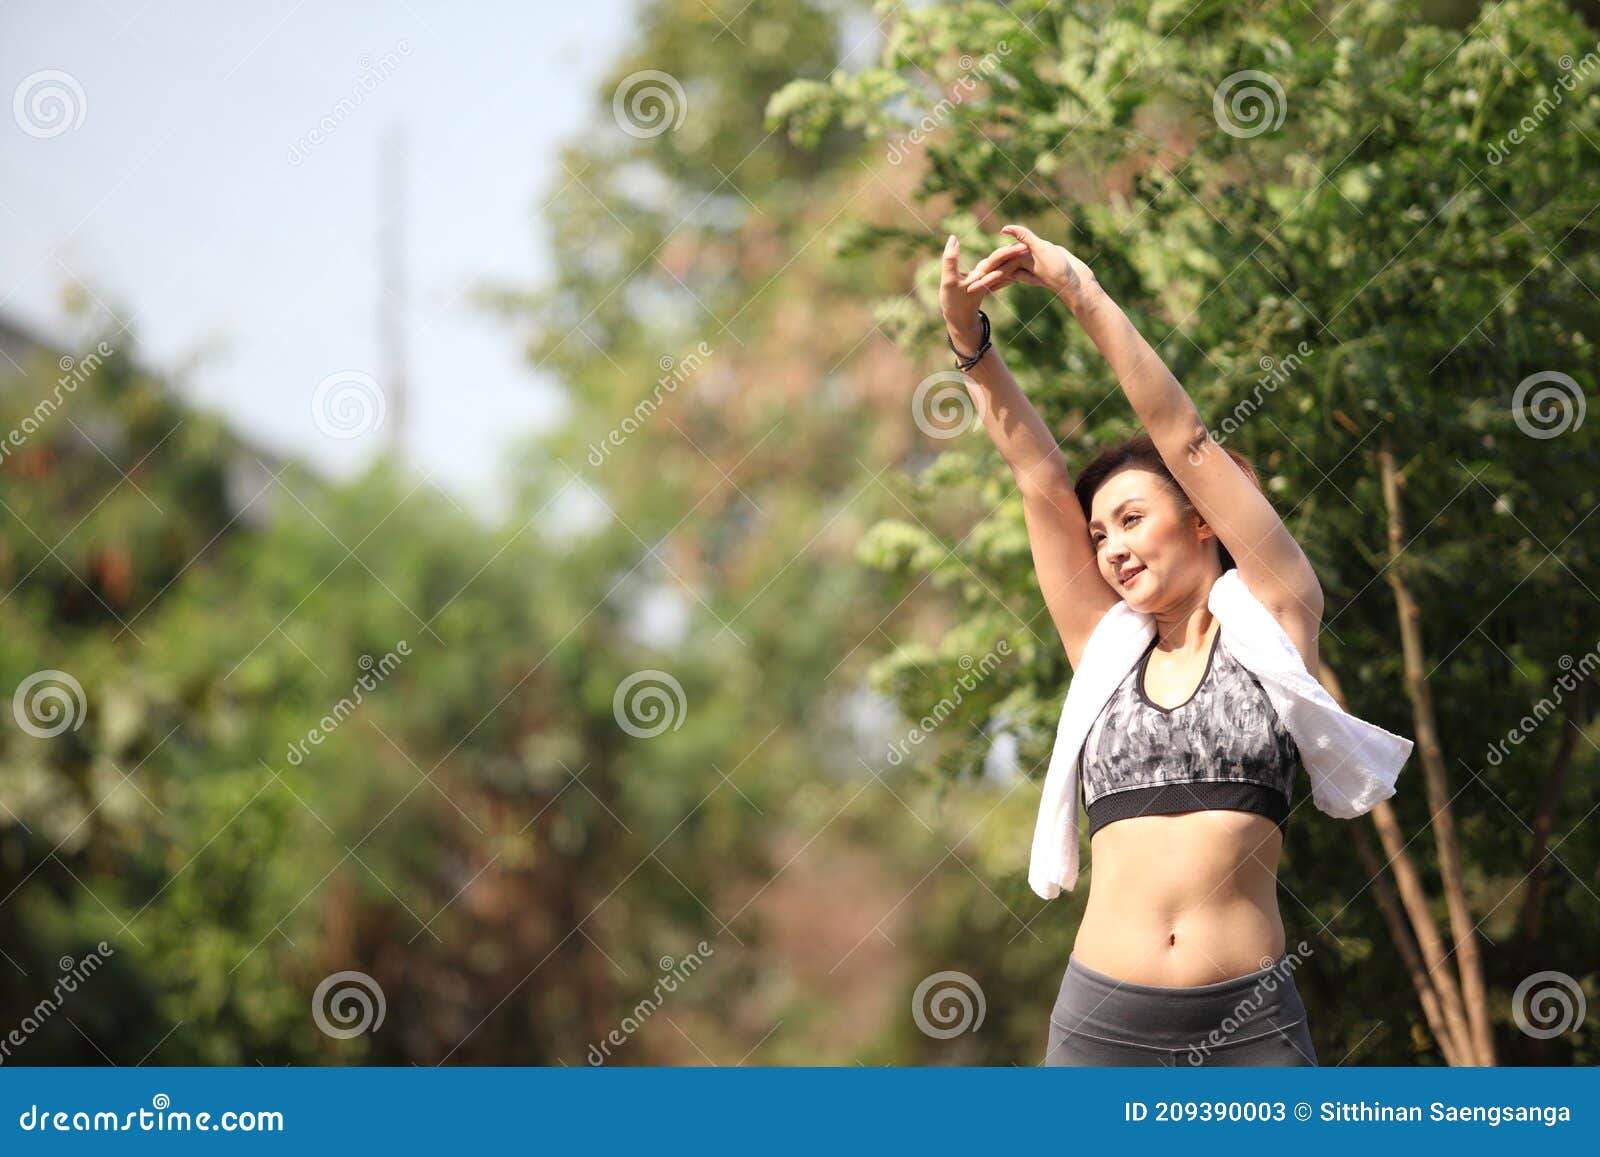 Fitness Runner Body Closeup Stock Image - Image of jogging, muscles ...